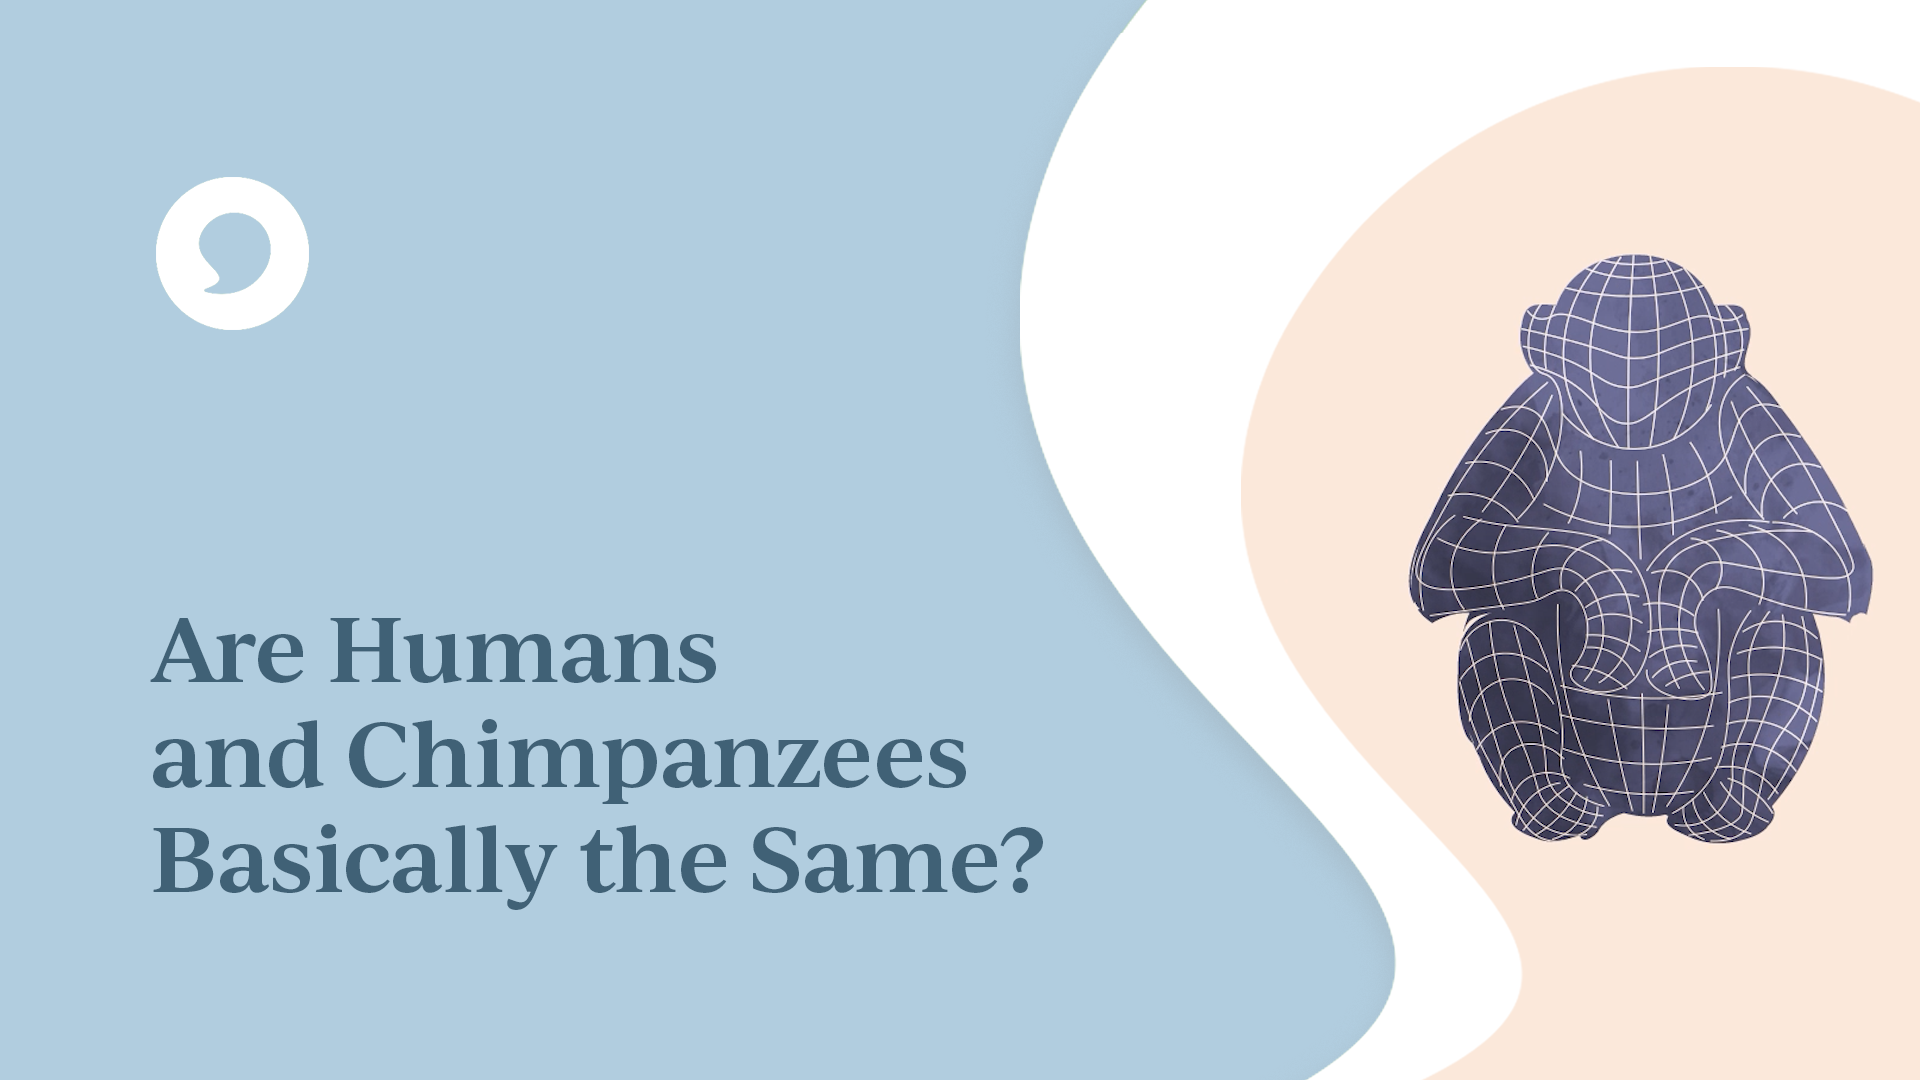 Are Humans and Chimpanzees Basically the Same?